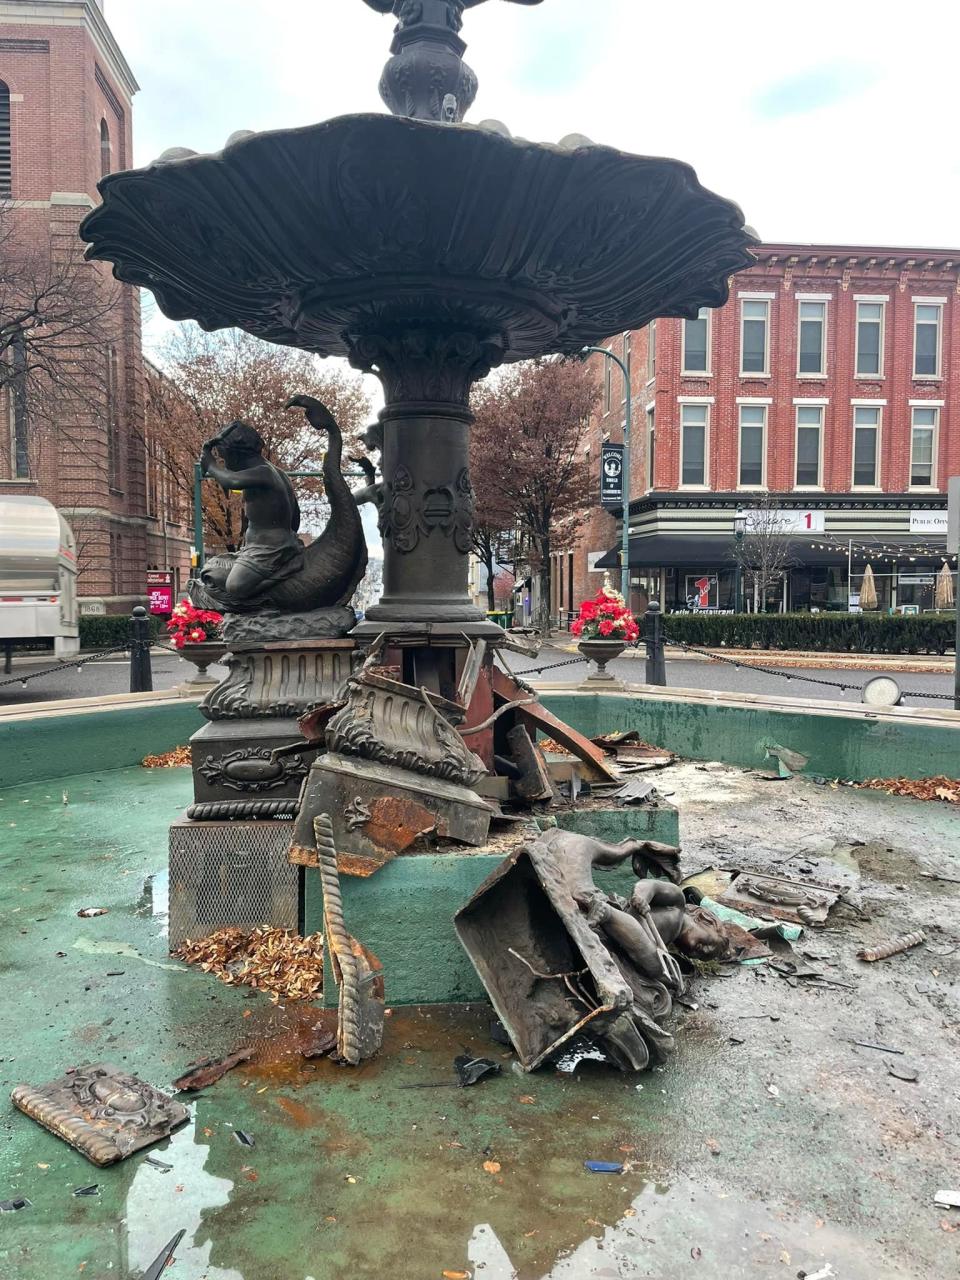 An SUV struck Chambersburg's Memorial Fountain, causing significant damage, early on Dec. 2, 2021.